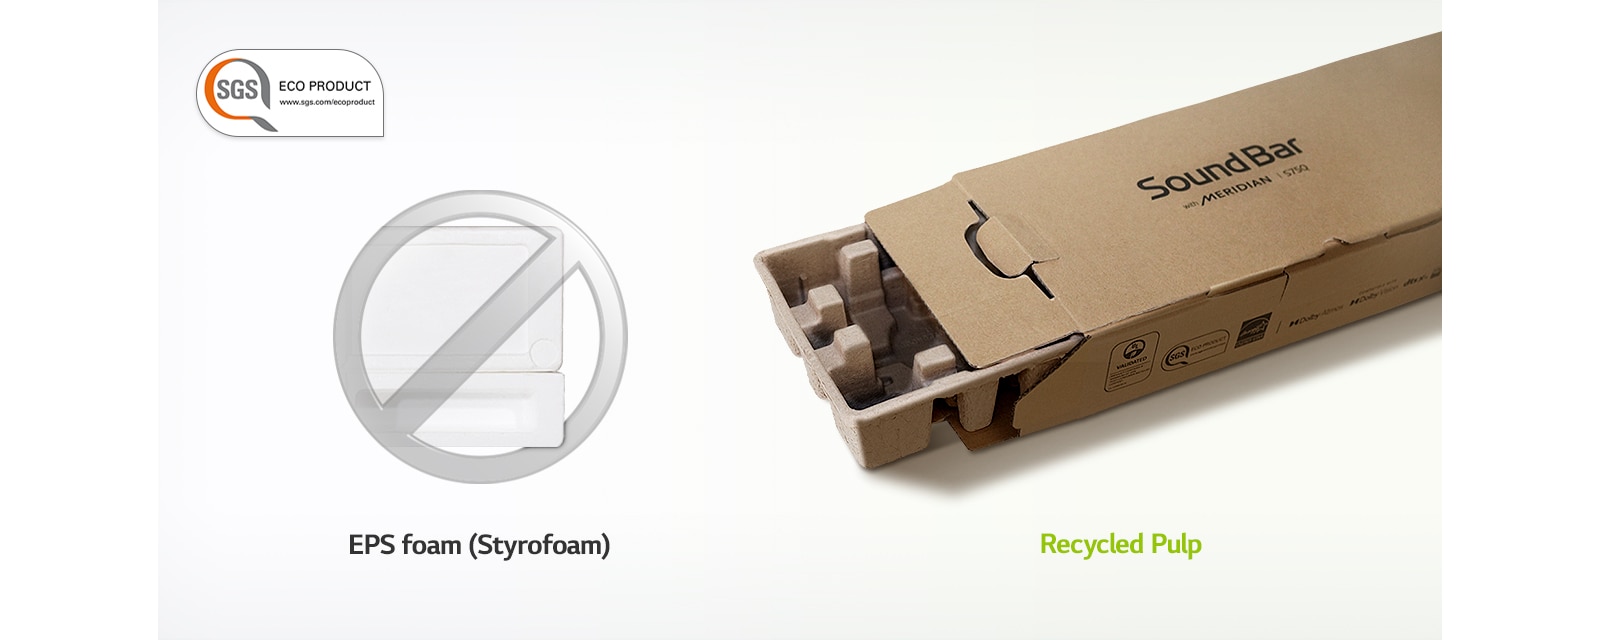 There is a gray forbidden mark on styrofoam image on left and packaging box image on right.